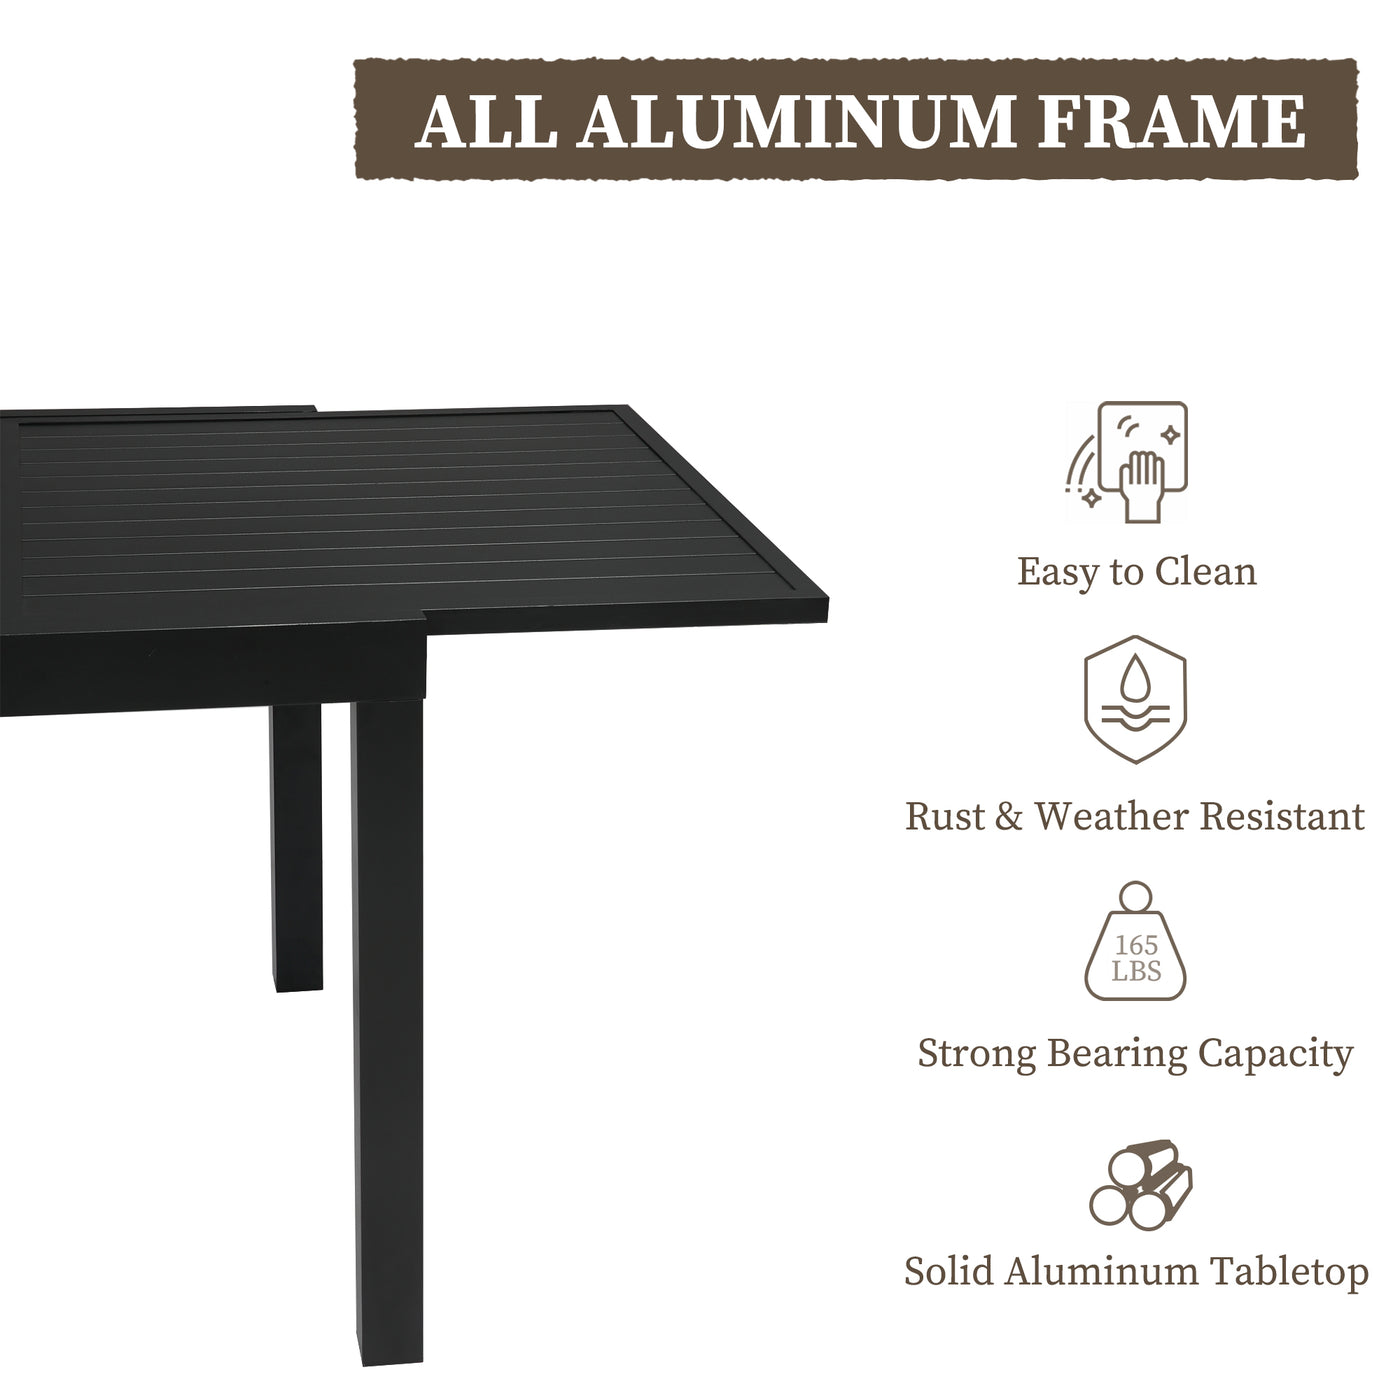 Pizzello Aluminum Patio Extendable Dining Table with easy-to-clean surface, rust and weather resistance, and strong bearing capacity.